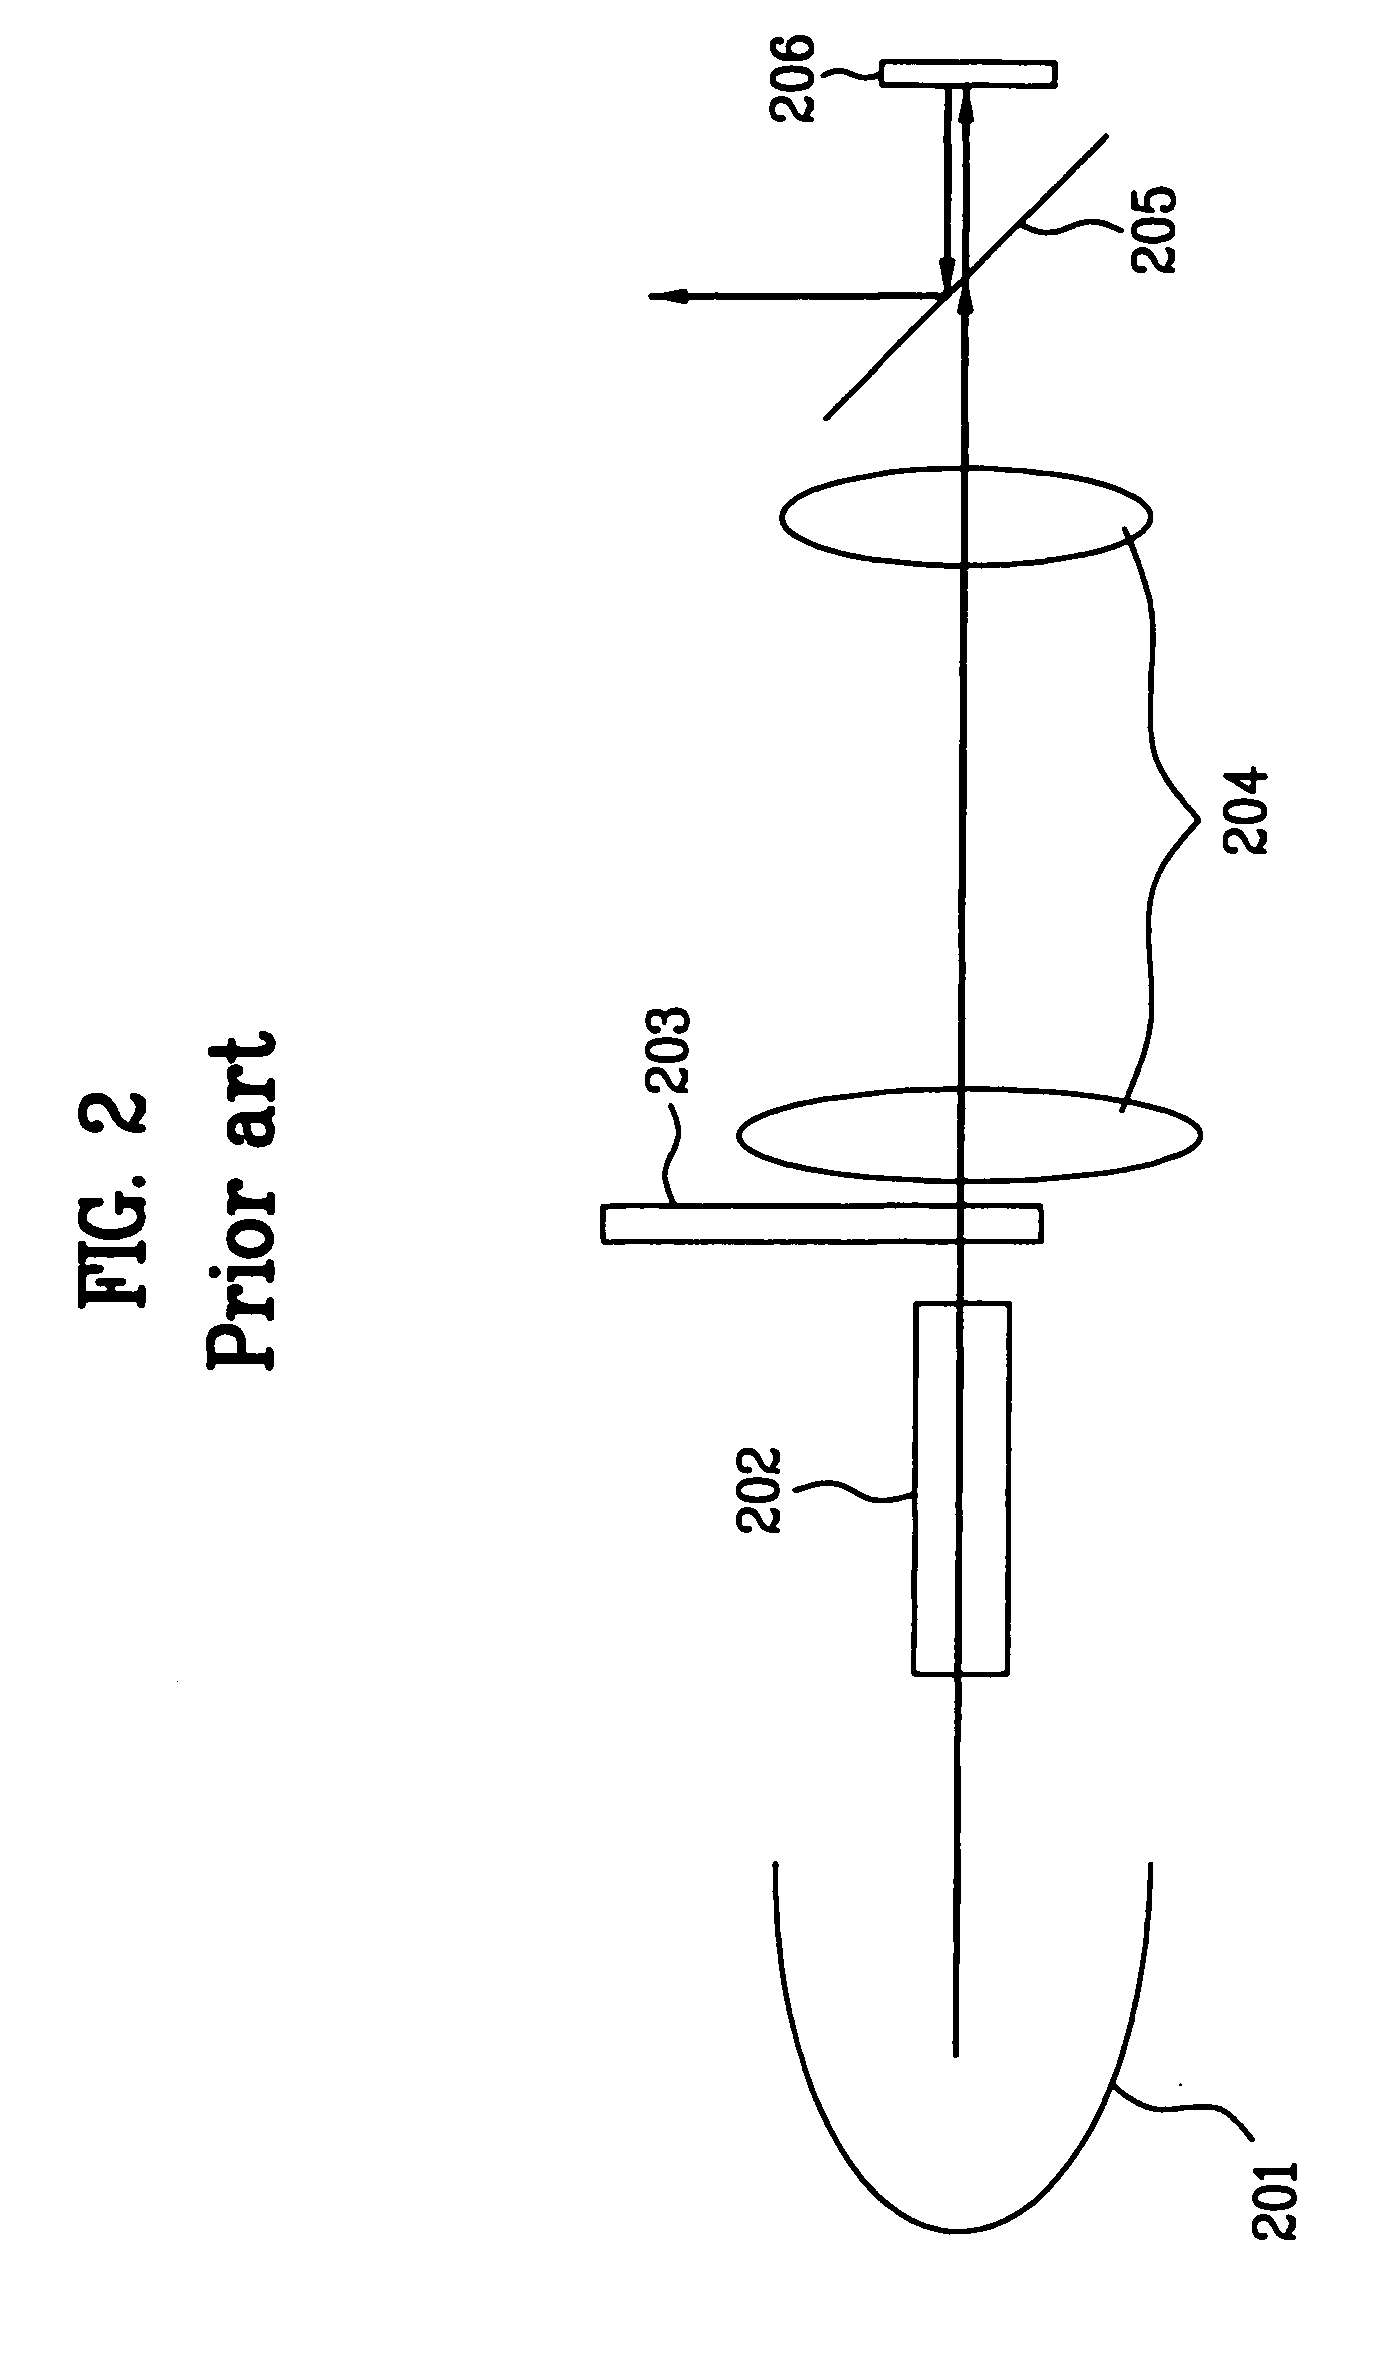 Single panel illumination system and projection display apparatus using the same